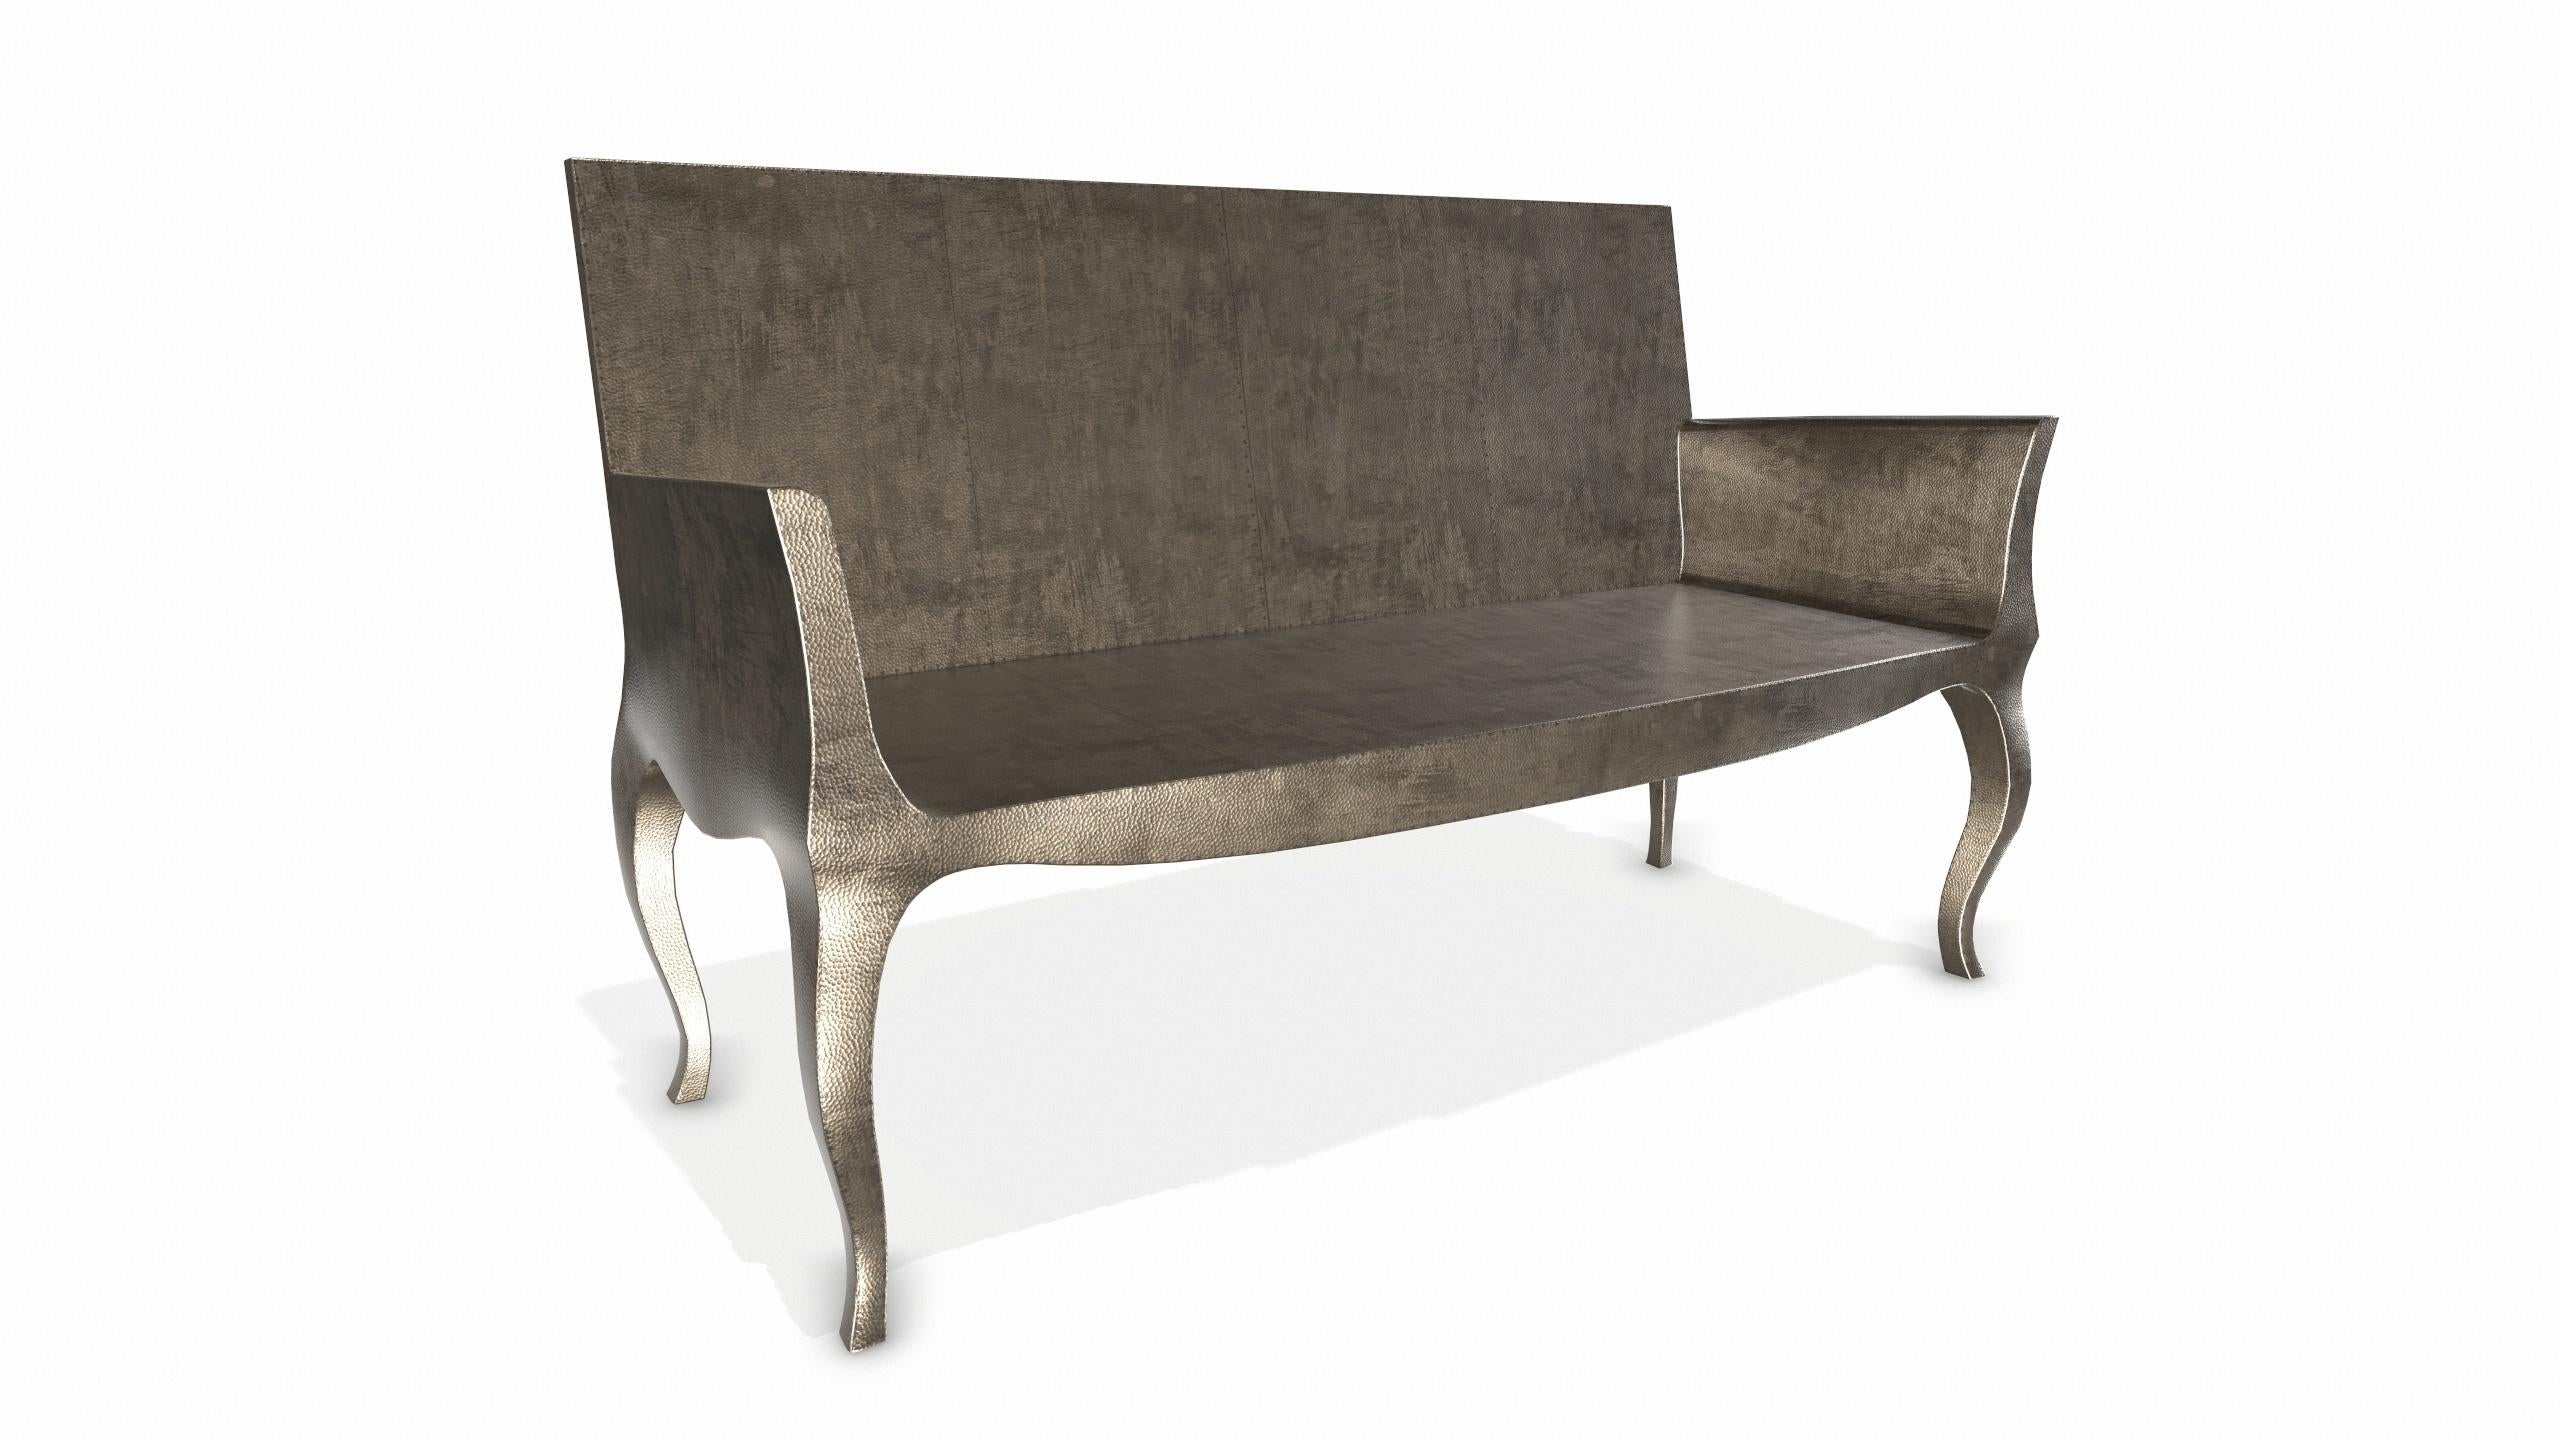 Contemporary Louise Settee Art Deco Settees in Mid. Hammered Antique Bronze by Paul Mathieu For Sale